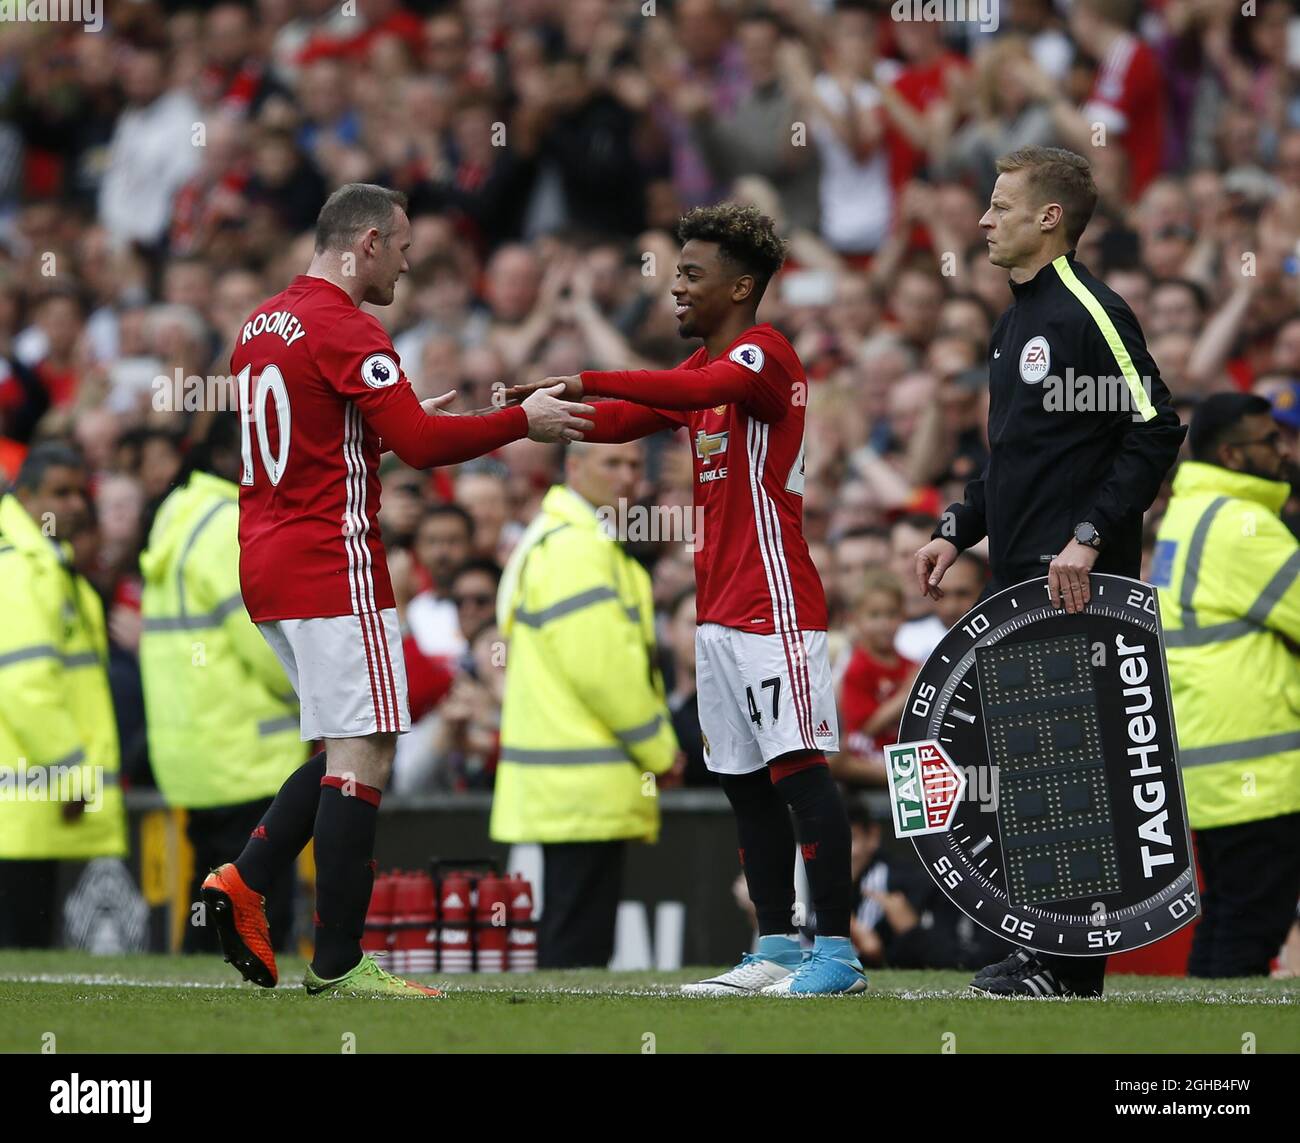 16 year old Angel Gomes of Manchester United makes his first team debut  replacing Wayne Rooney of Manchester United during the English Premier  League match at the Old Trafford Stadium, Manchester. Picture